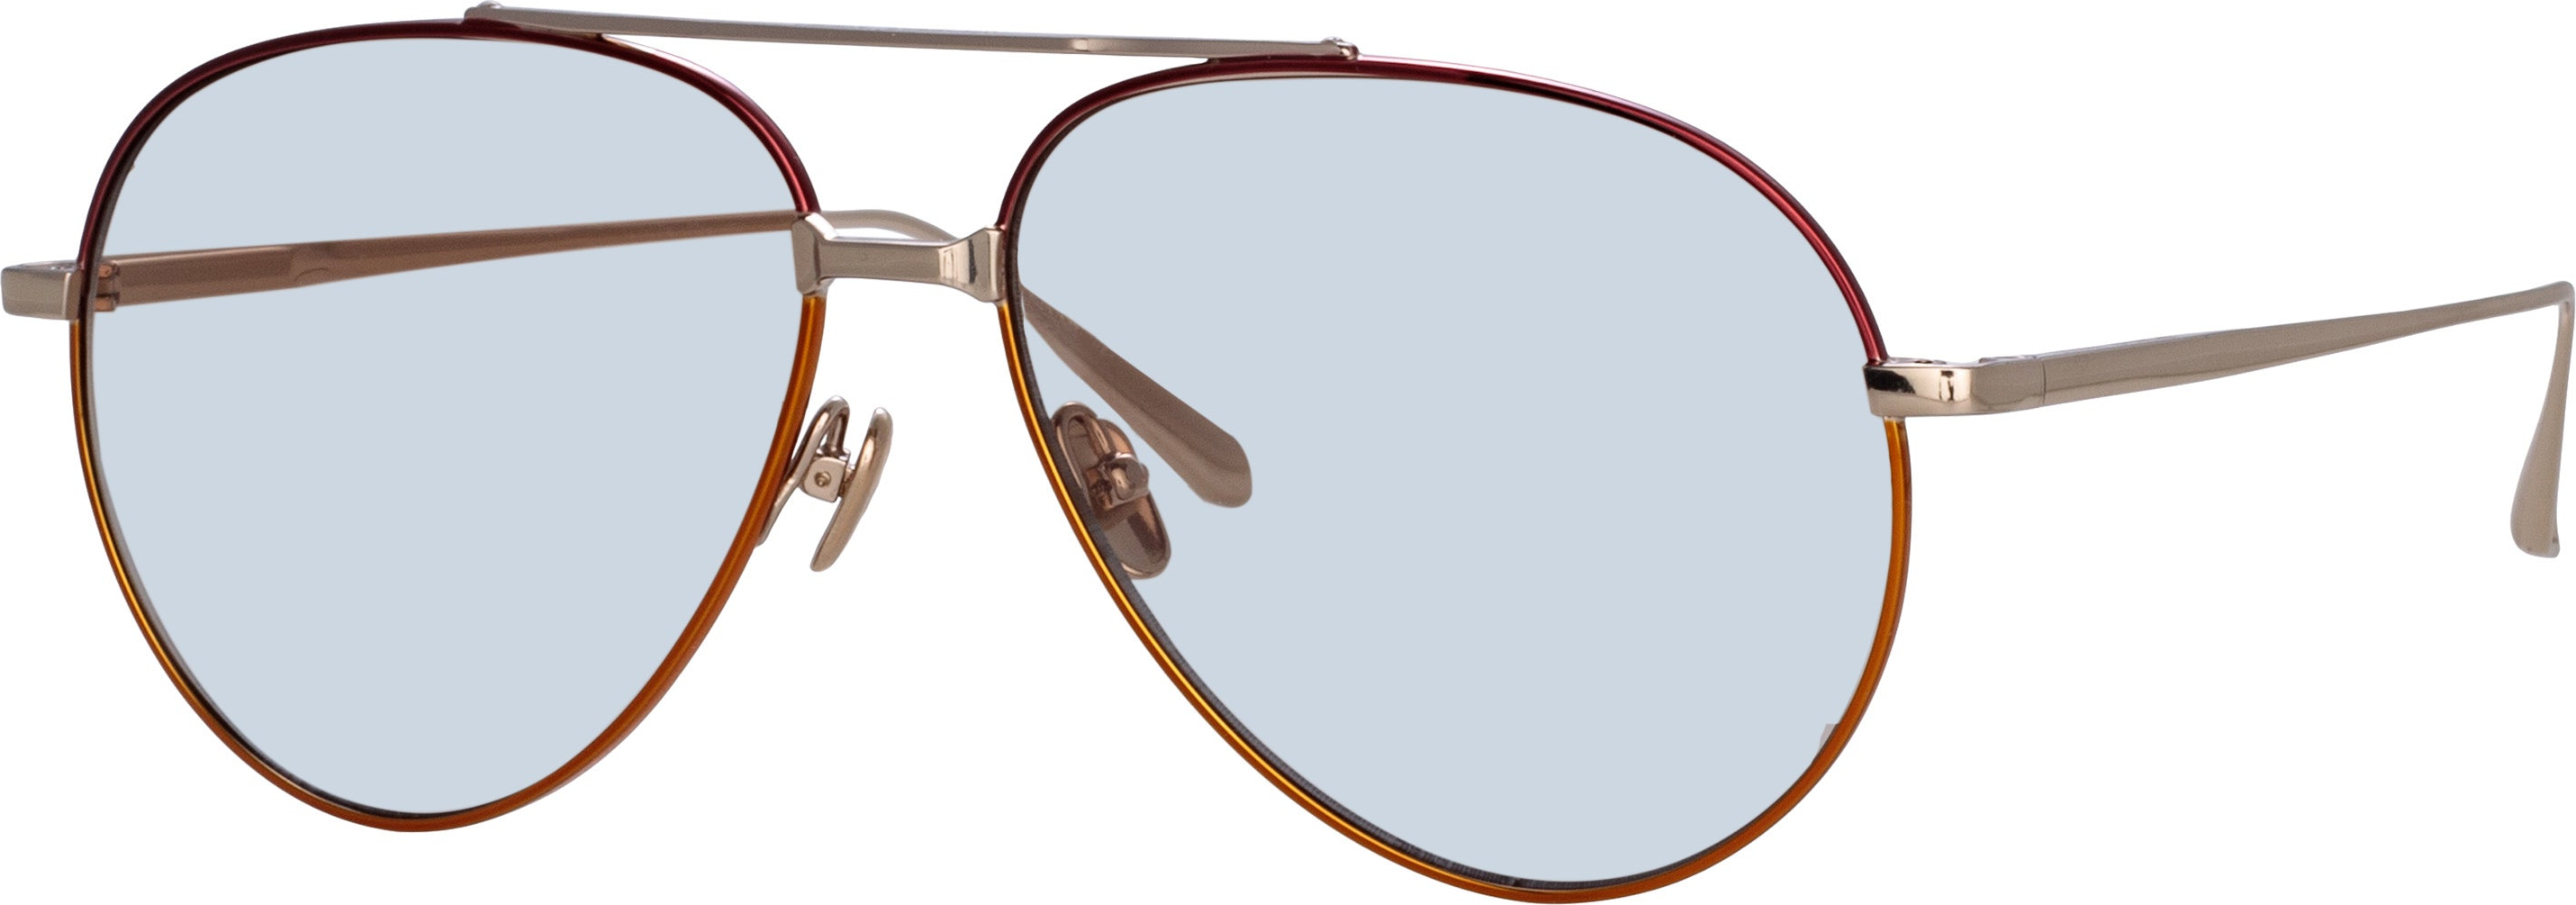 Color_LFL1421C4SUN - Marcelo Aviator Sunglasses in Light Blue and Red